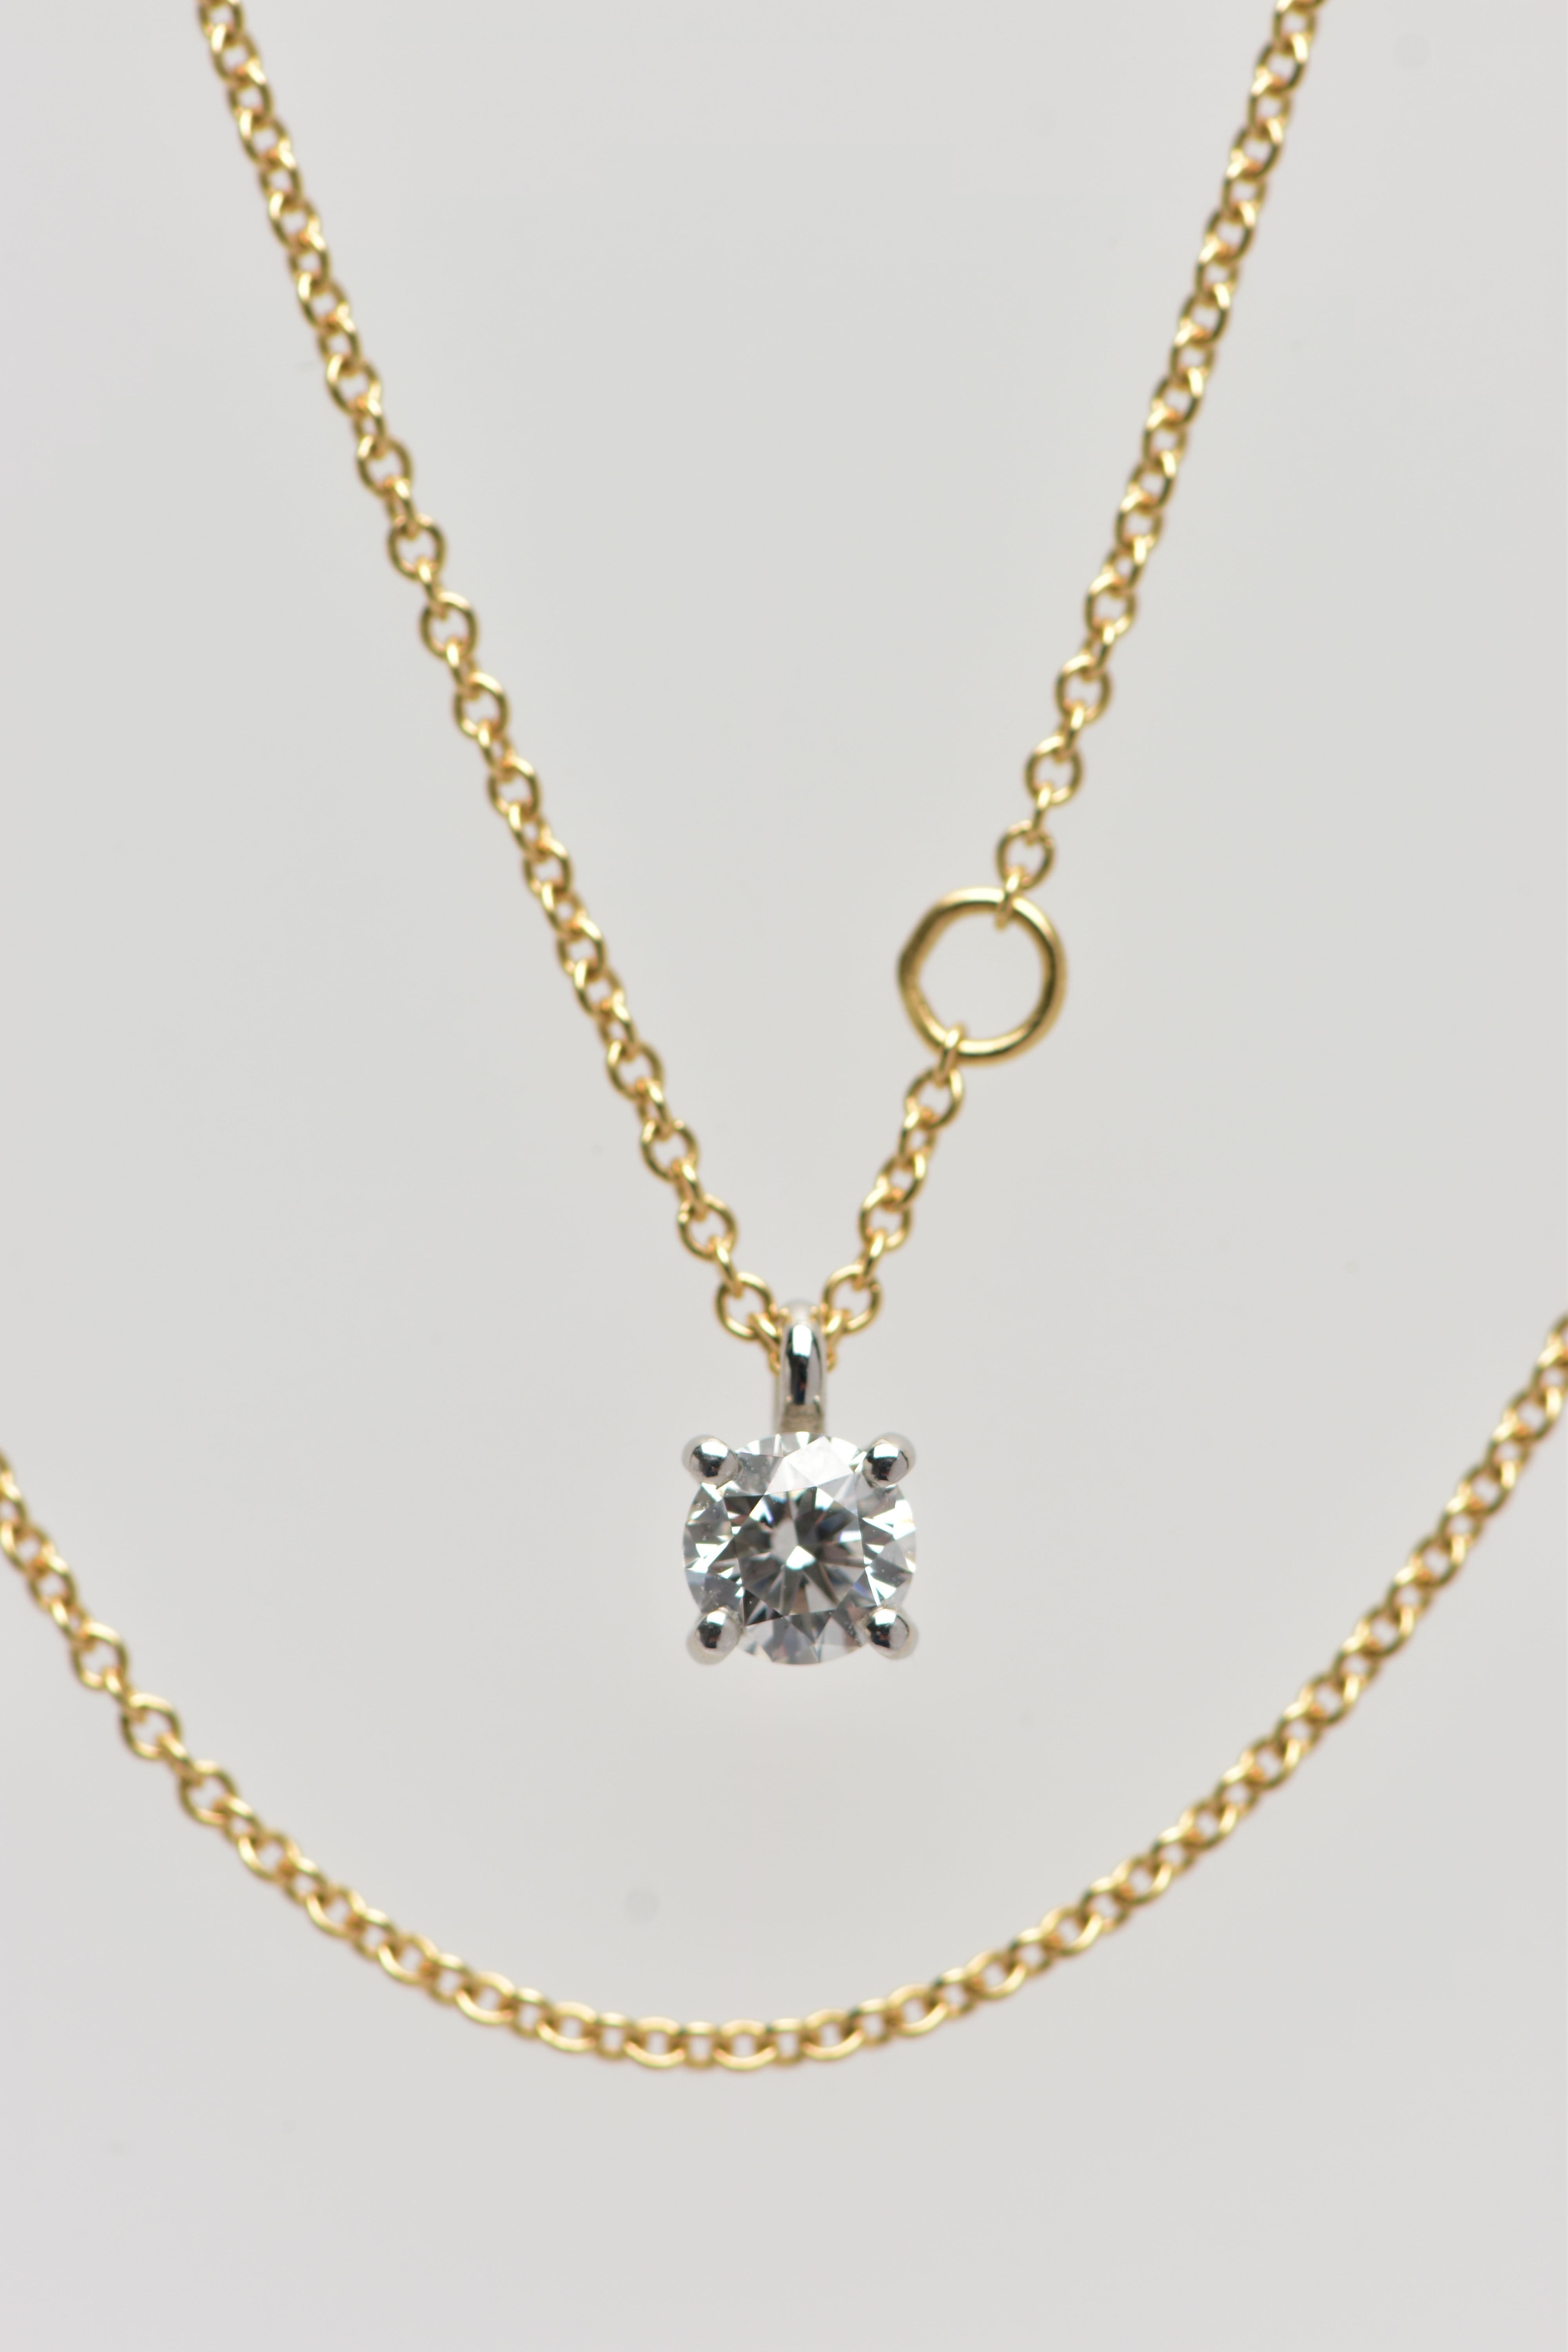 AN 18CT YELLOW AND WHITE GOLD TIFFANY & CO DIAMOND PENDANT NECKLACE, set with a round brilliant - Image 5 of 6